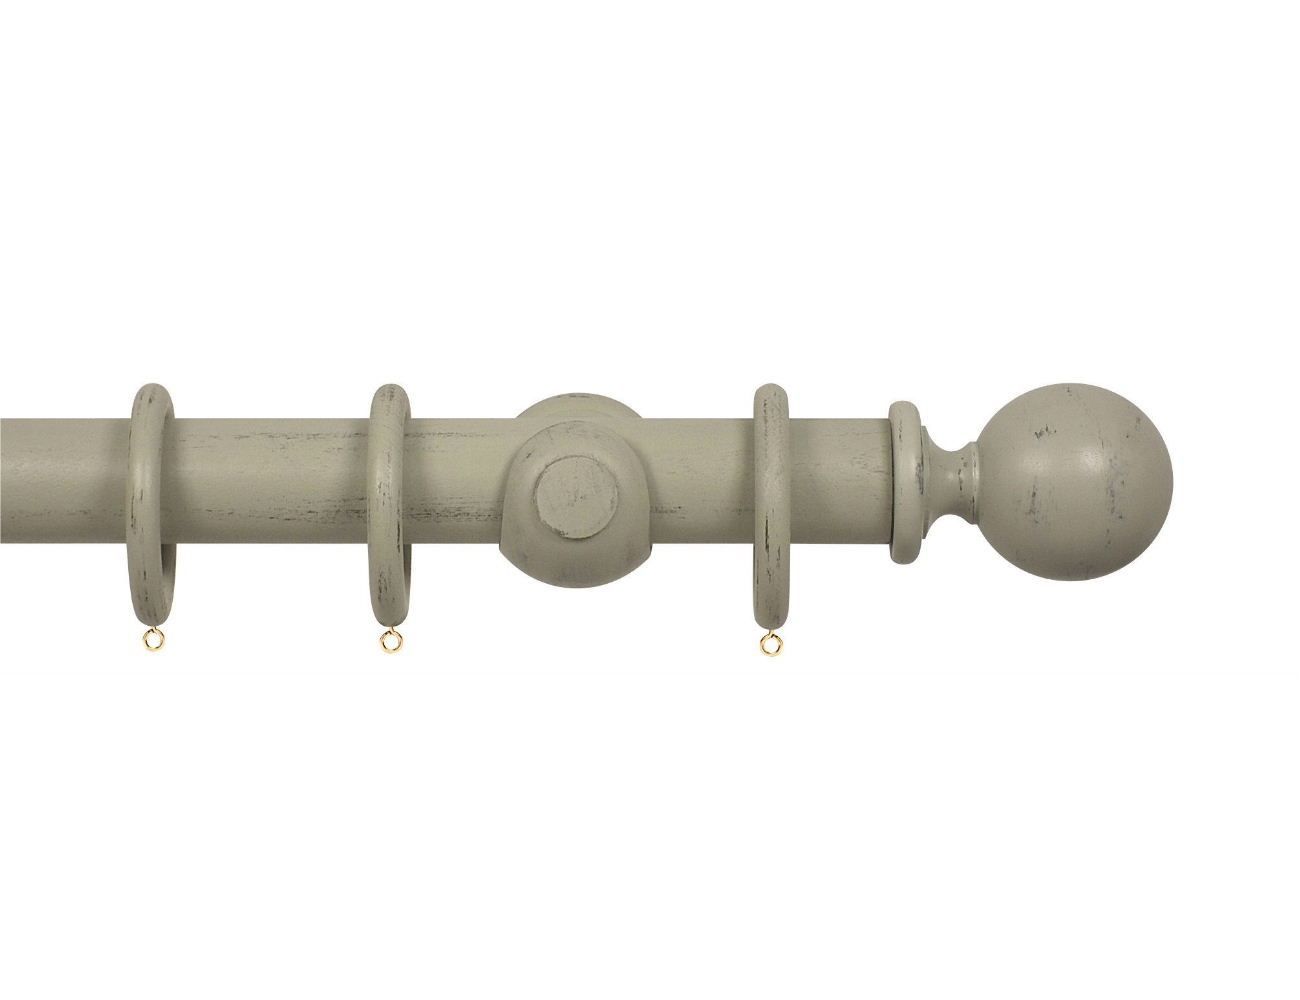 Grey Wooden Curtain Pole Pertaining To Wooden Curtain Poles (View 10 of 25)